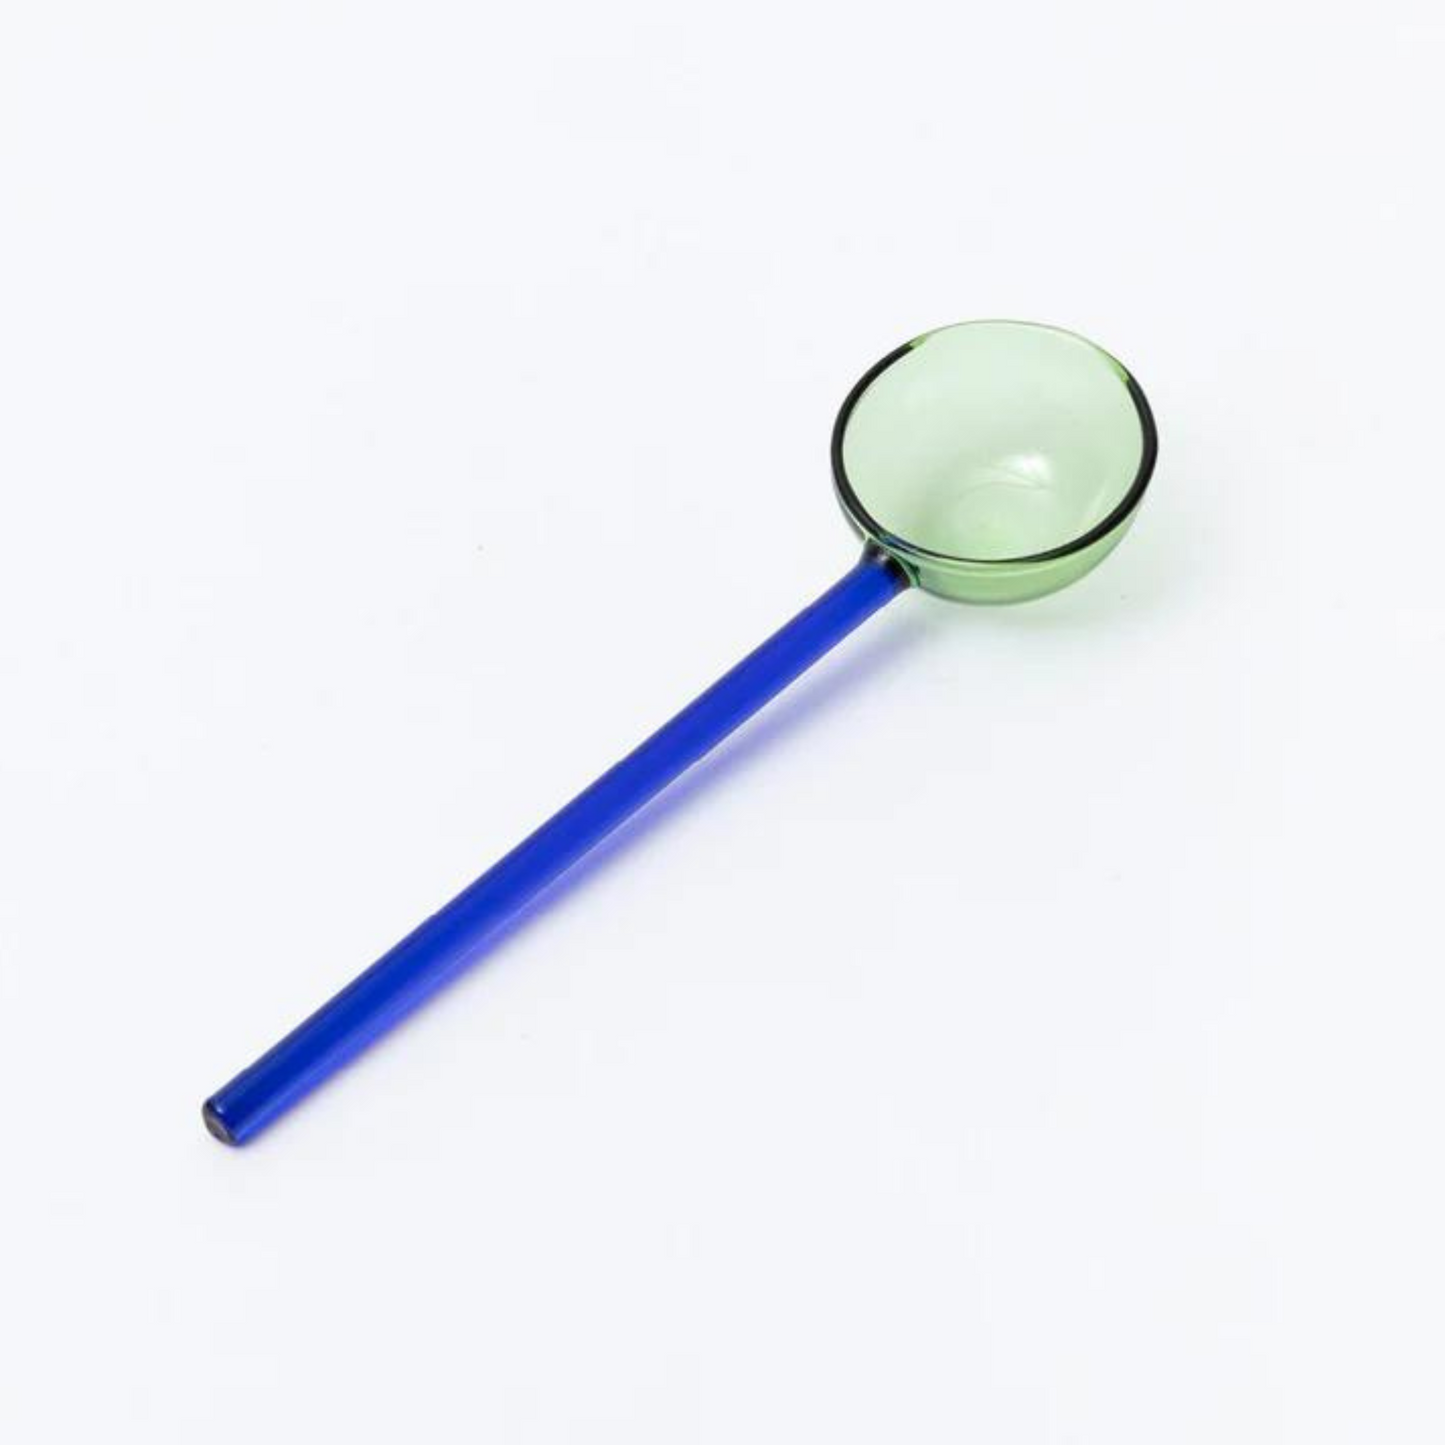 blue and green glass spoon.